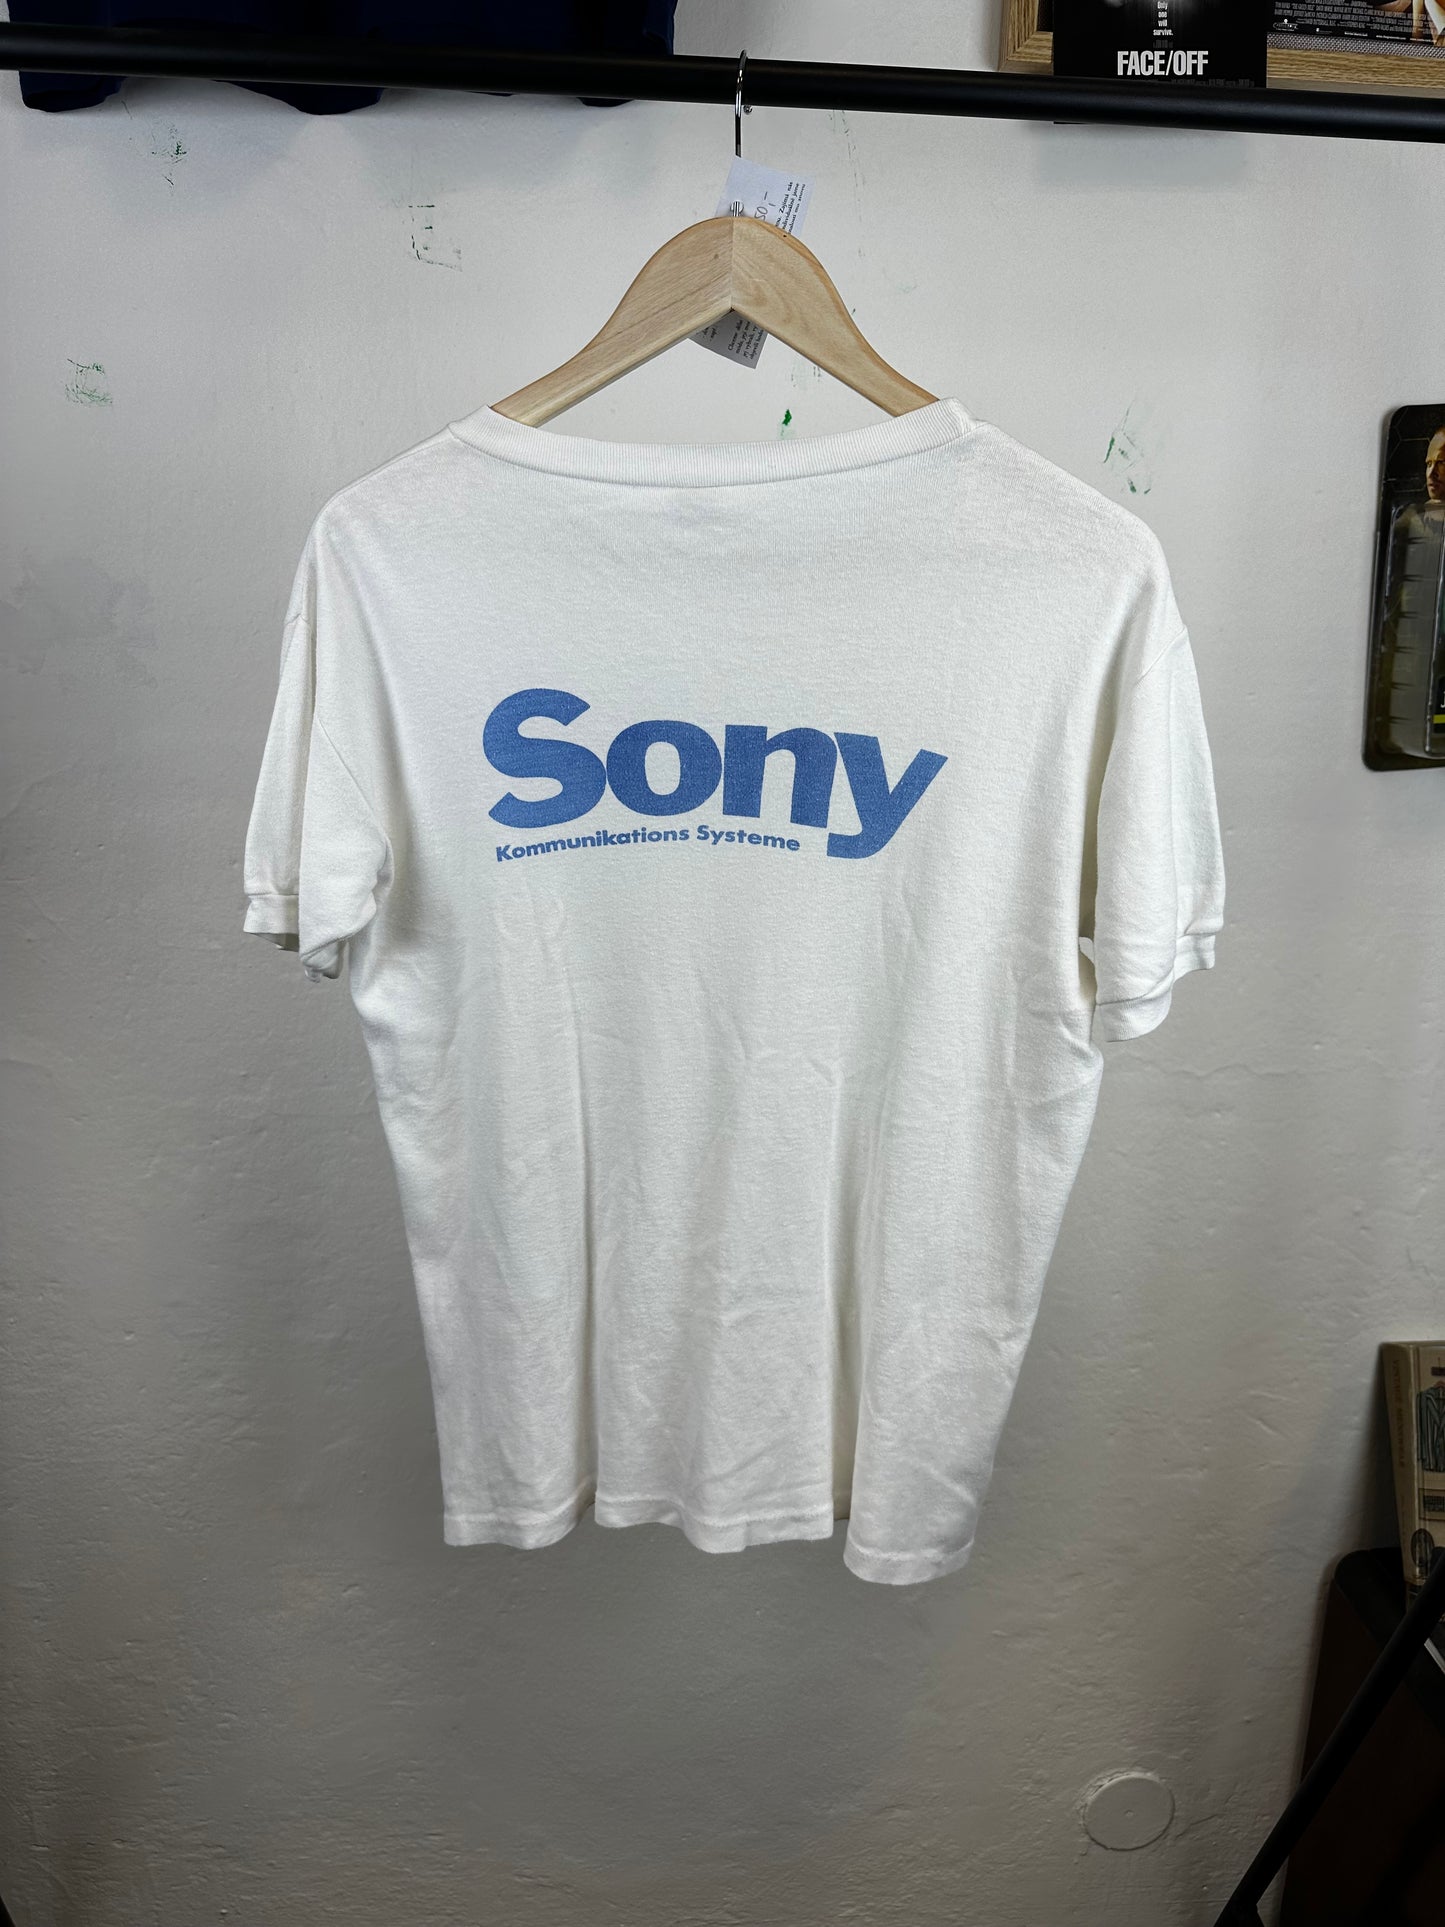 Vintage Sony 70s/80s t-shirt - size XL